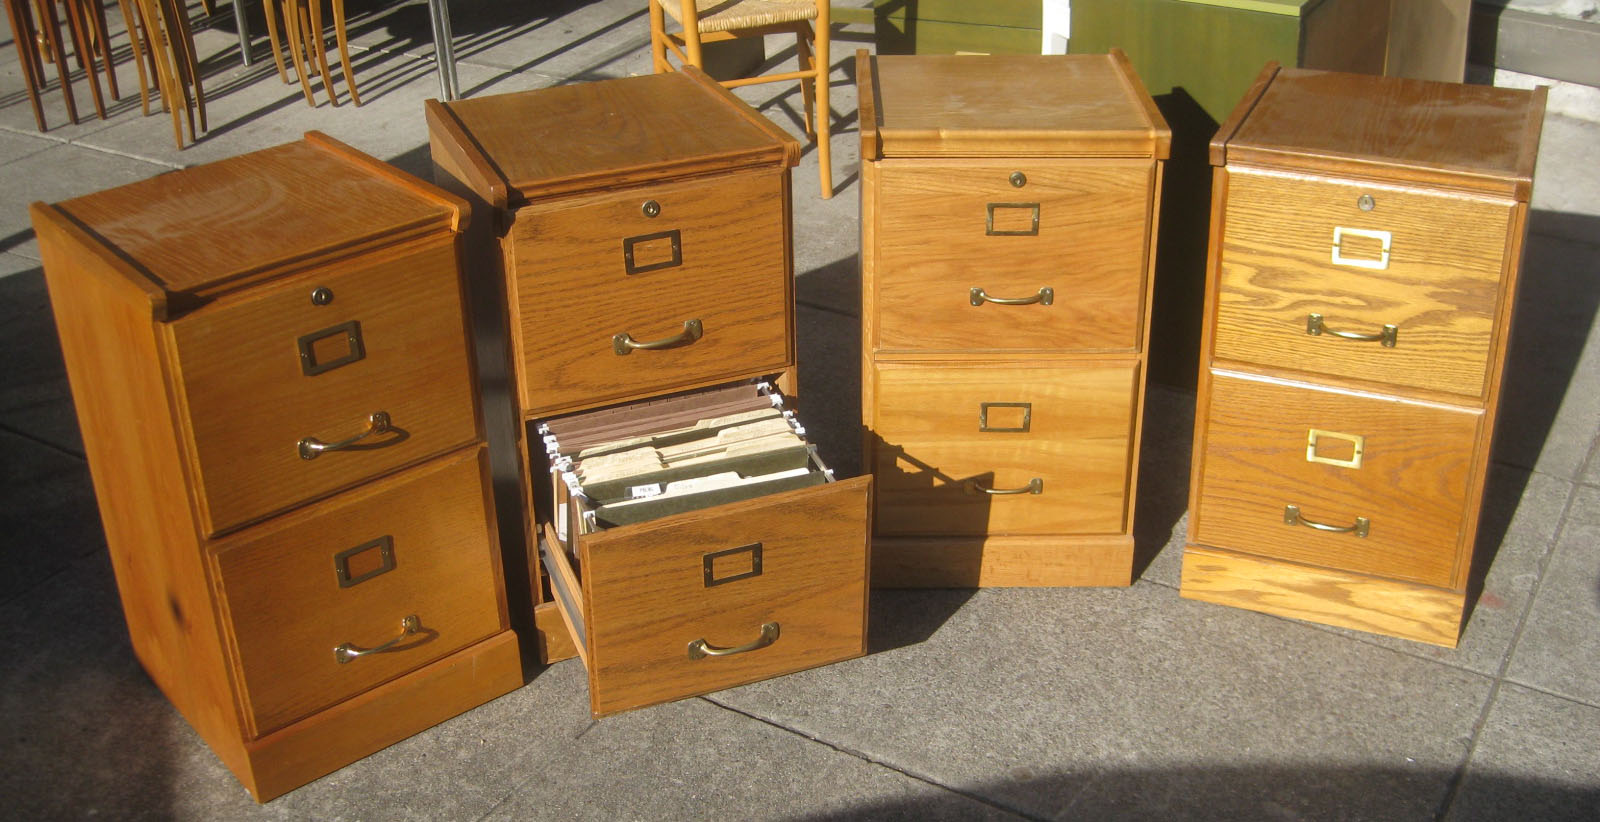 UHURU FURNITURE & COLLECTIBLES: SOLD - 2 Drawer Wooden File Cabinets 